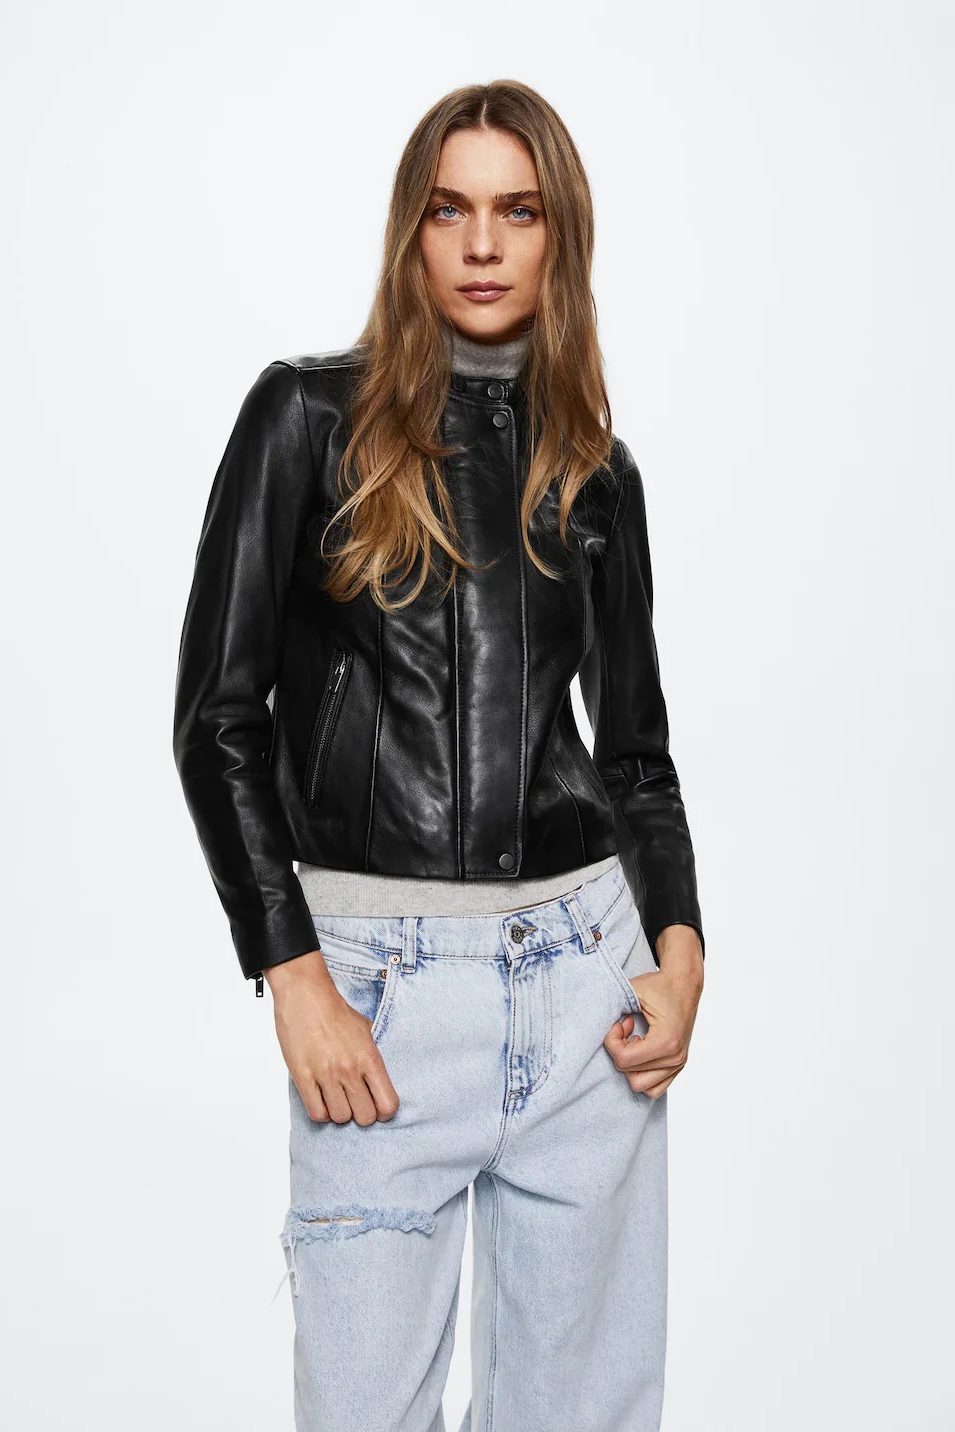 cute leather jackets for women